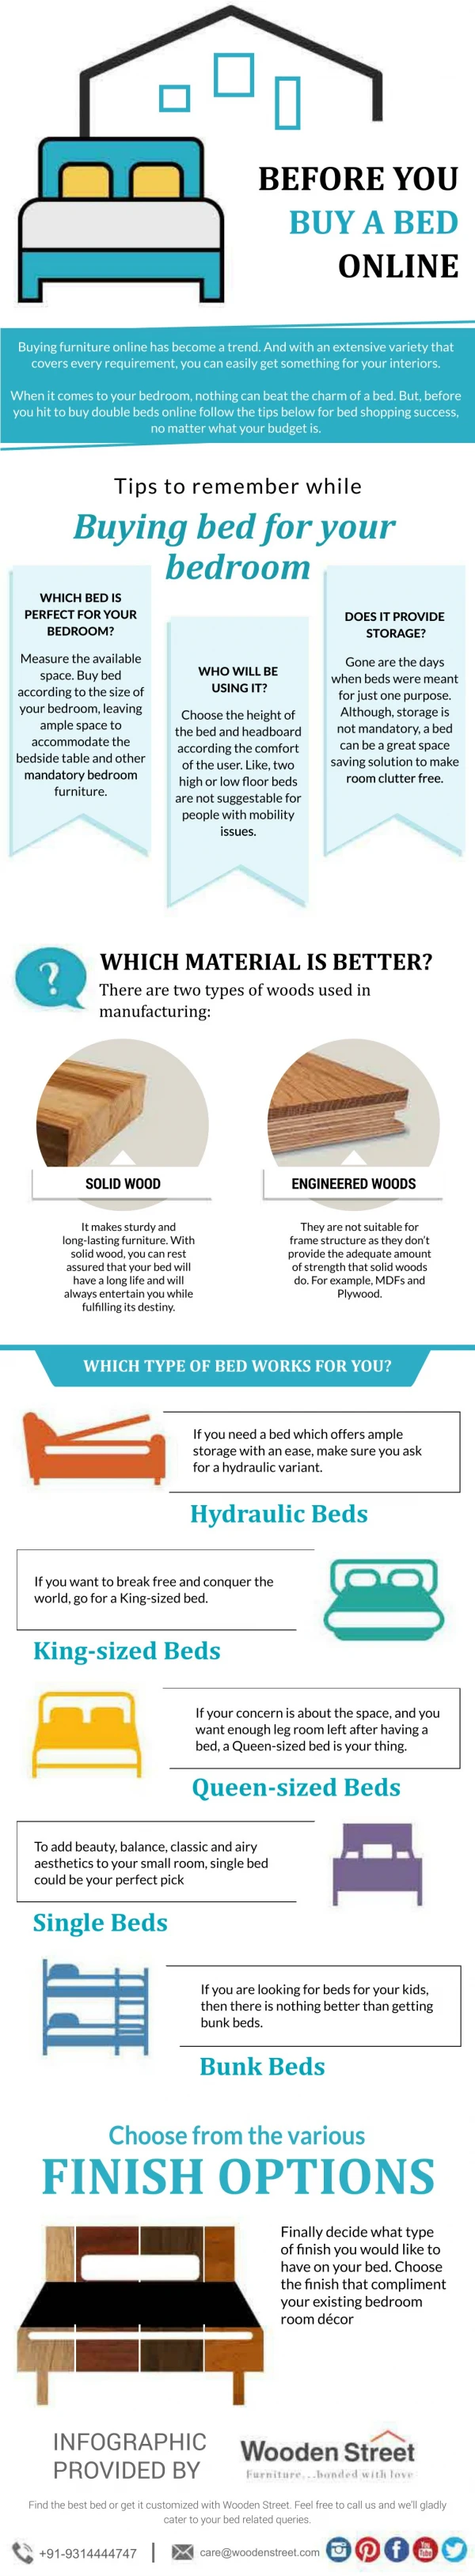 Buying Guide for Bed Furniture by Wooden Street